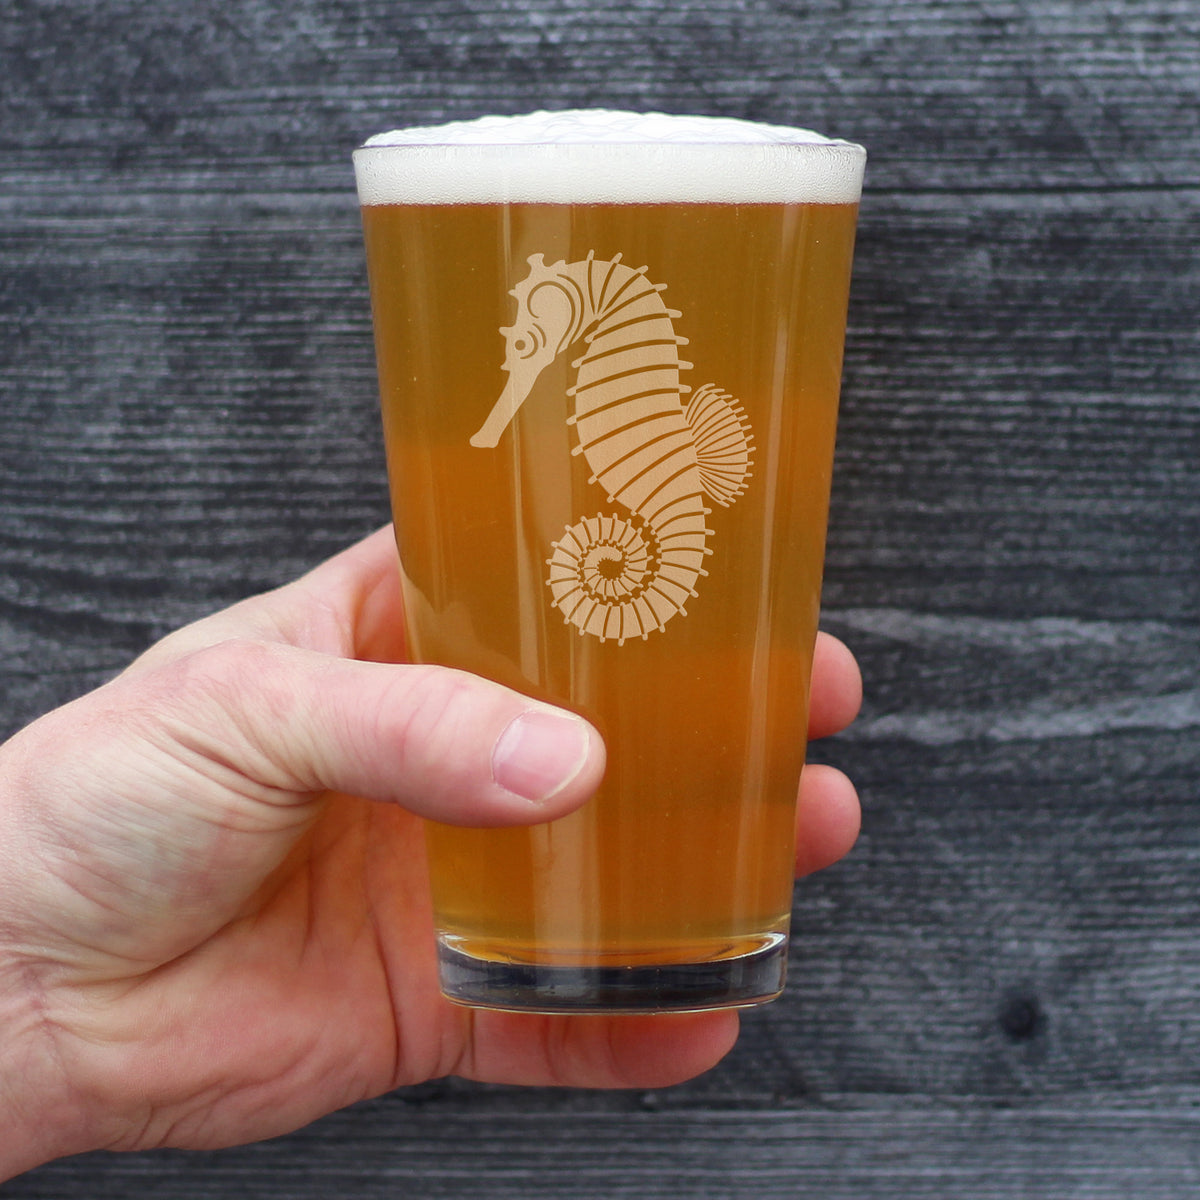 Seahorse Pint Glass for Beer - Unique Beachy Summer Gifts and Beach House Decor - 16 Oz Glasses